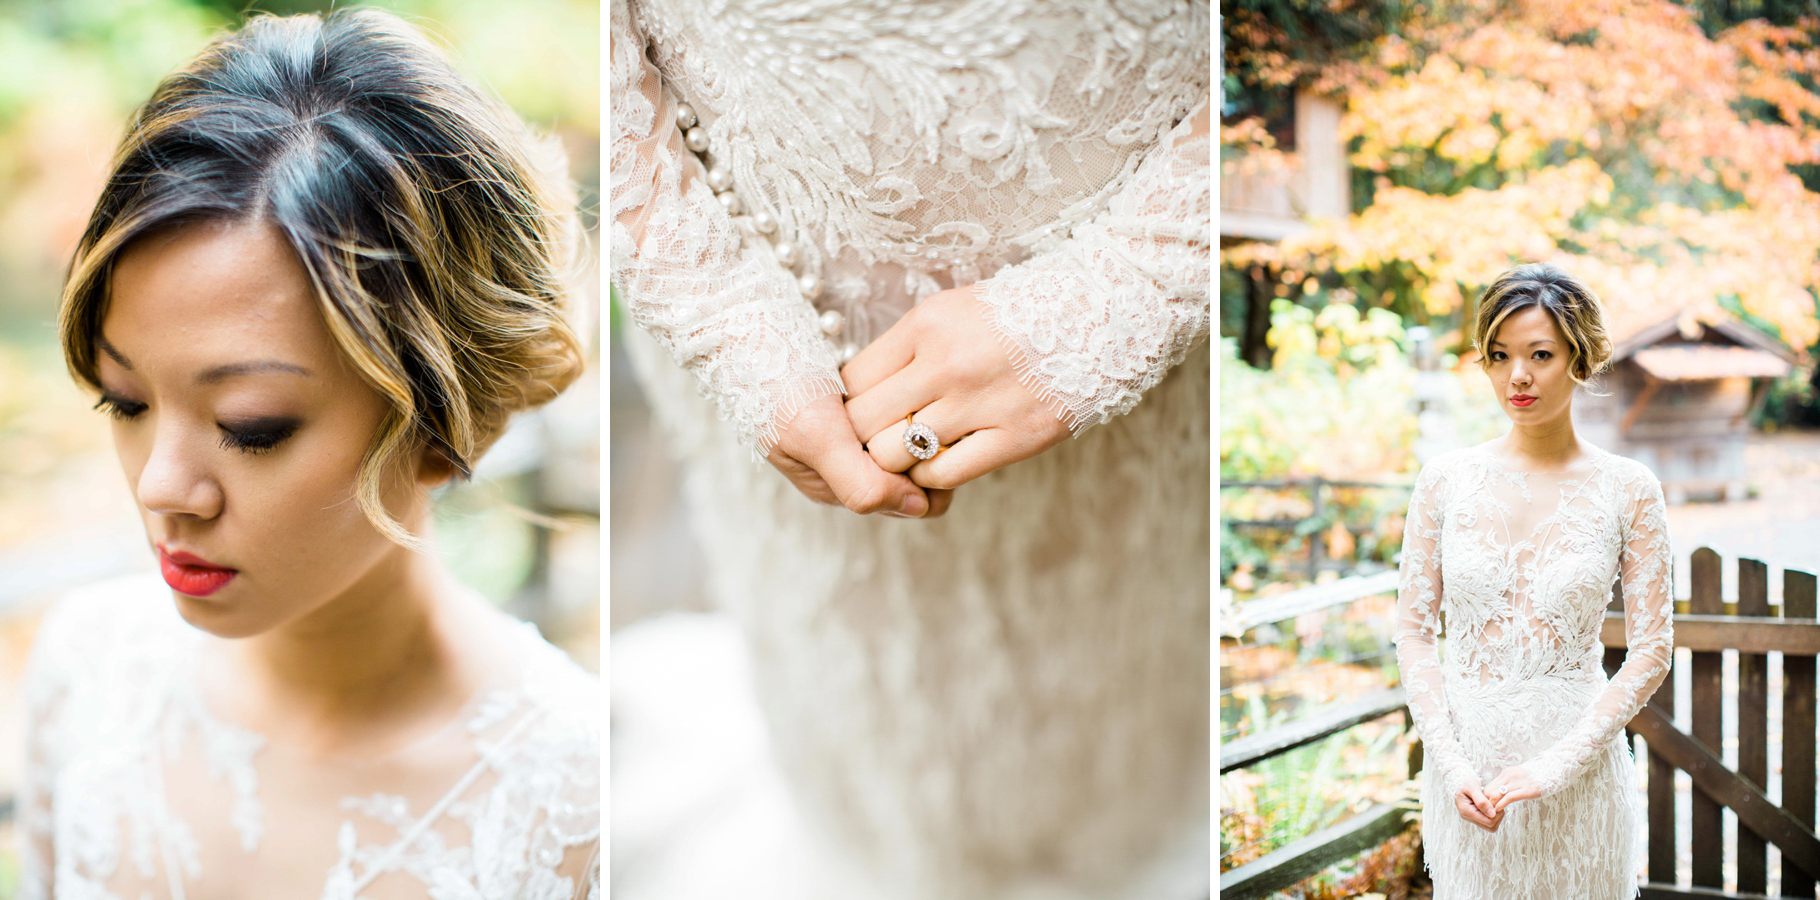 2-Bridal-Portraits-TreeHouse-Point-Mea-Marie-Bridal-Green-Lake-Jewelry-Elopement-Photographer-Seattle